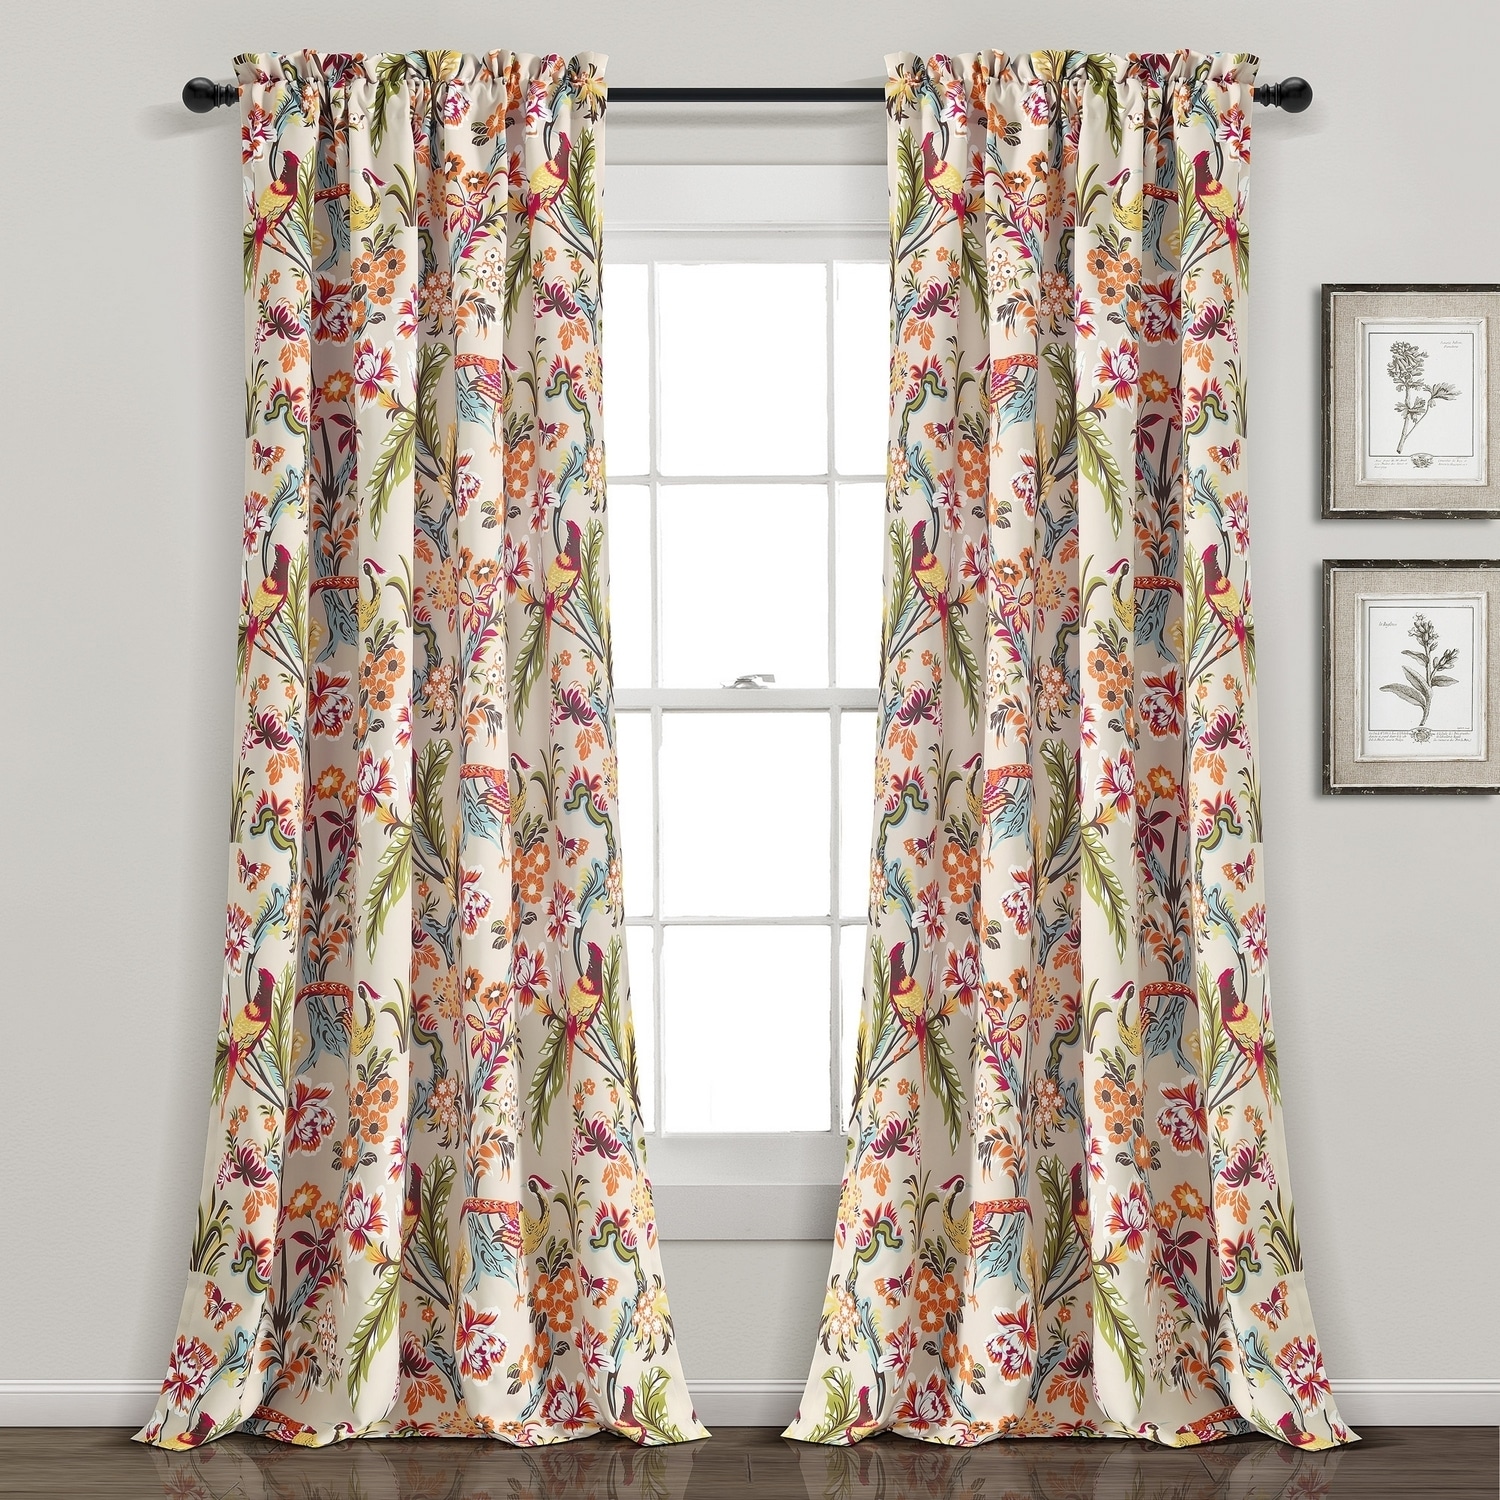 Lush Drapes & Pair at Pocket department Filtering in the 84-in Neutral Rod Curtains Light Curtain Decor Panel